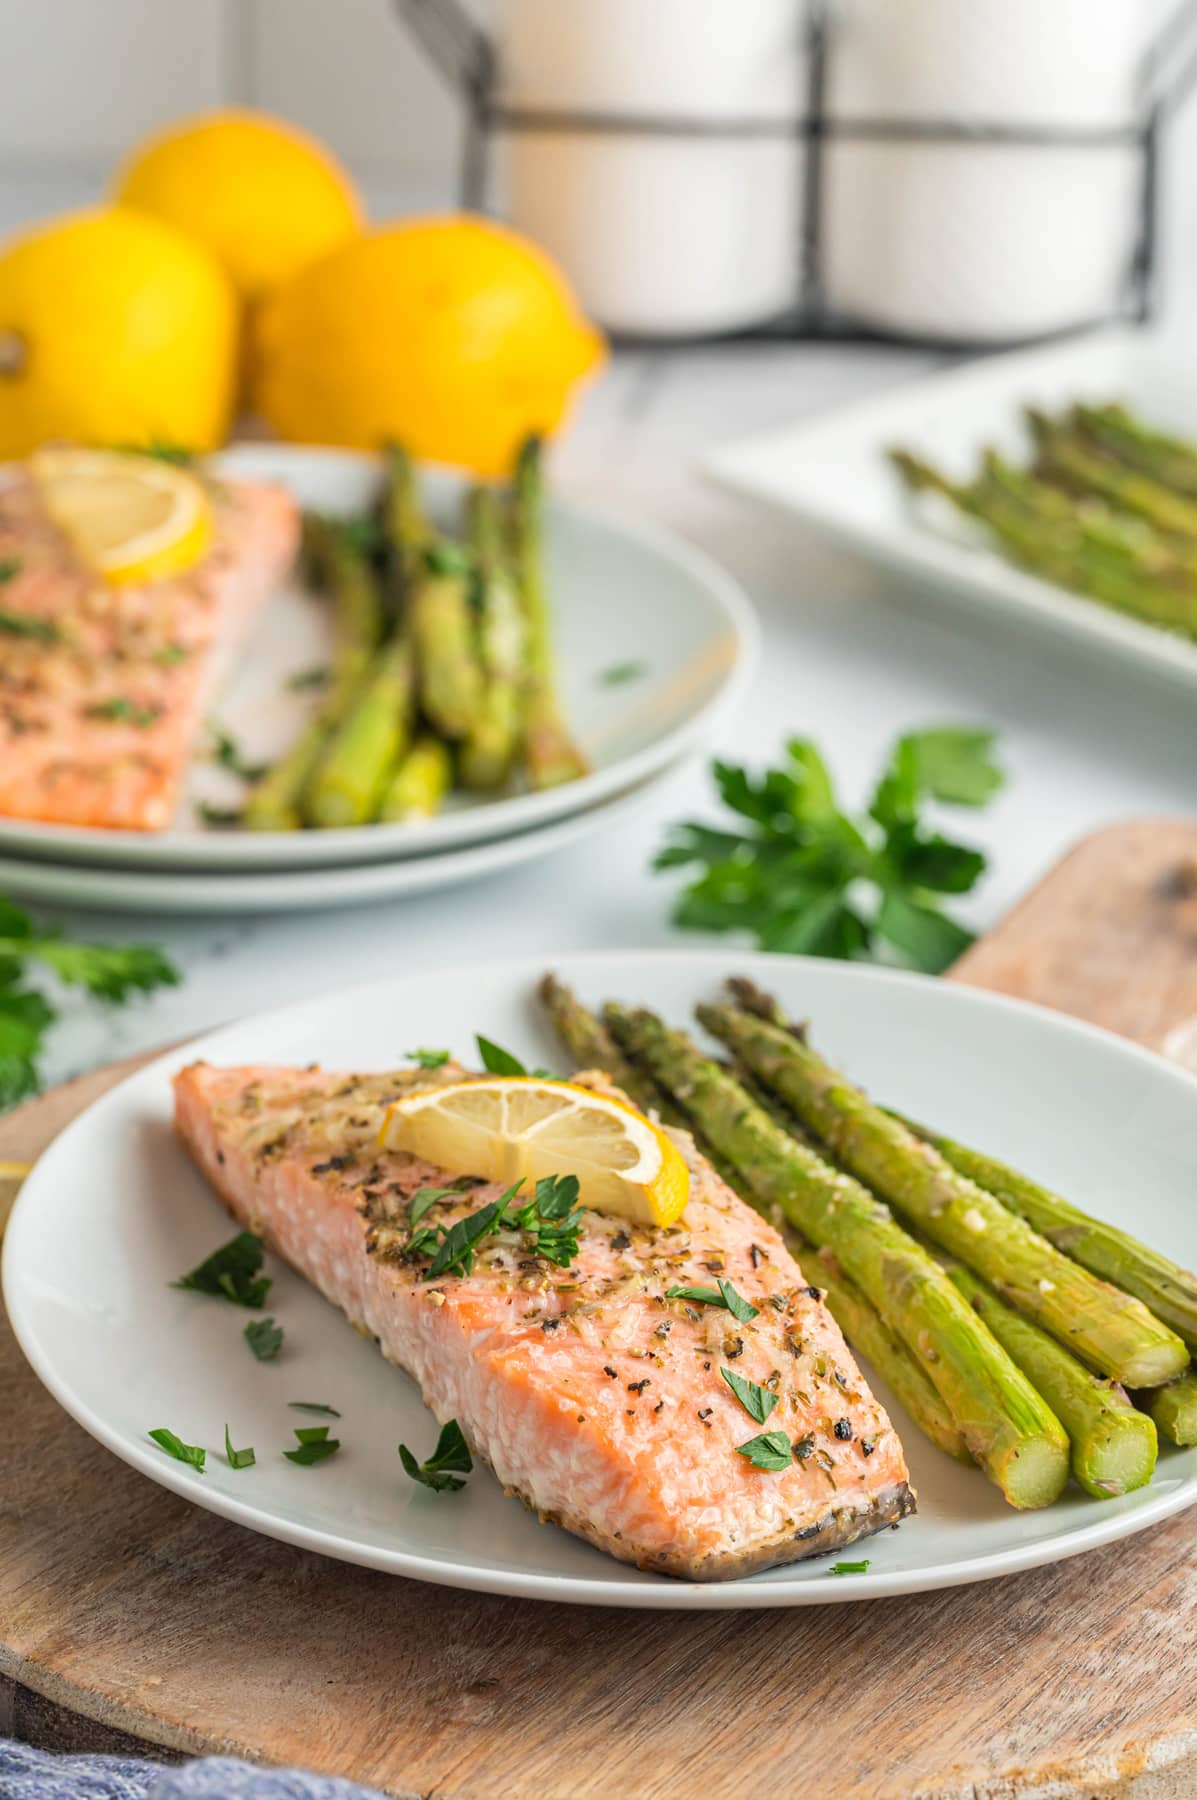 Angled view of two plates of baked salmon with asparagus